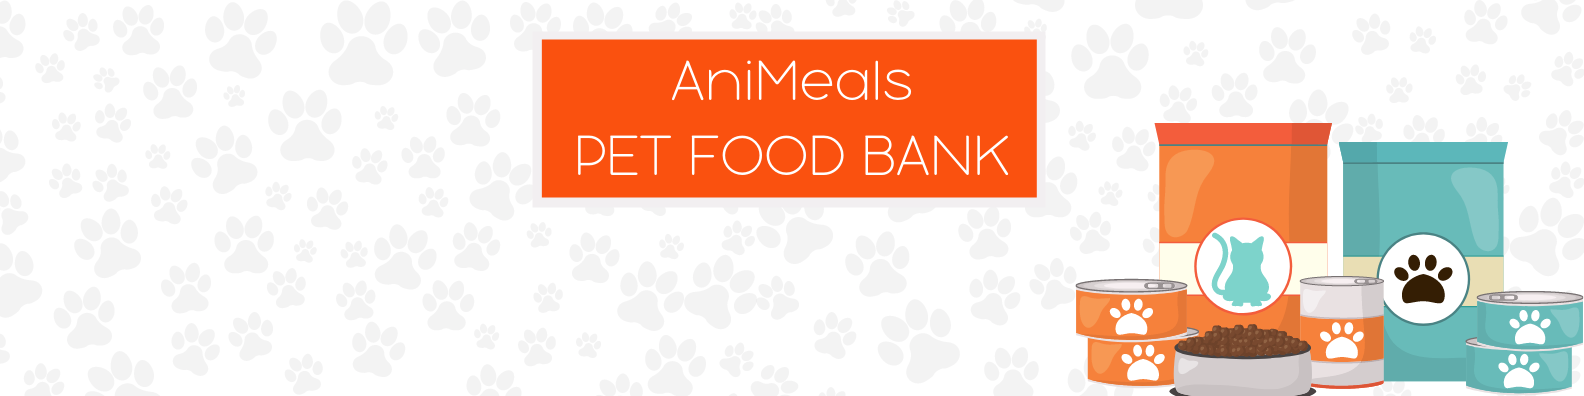 Learn more about AniMeals